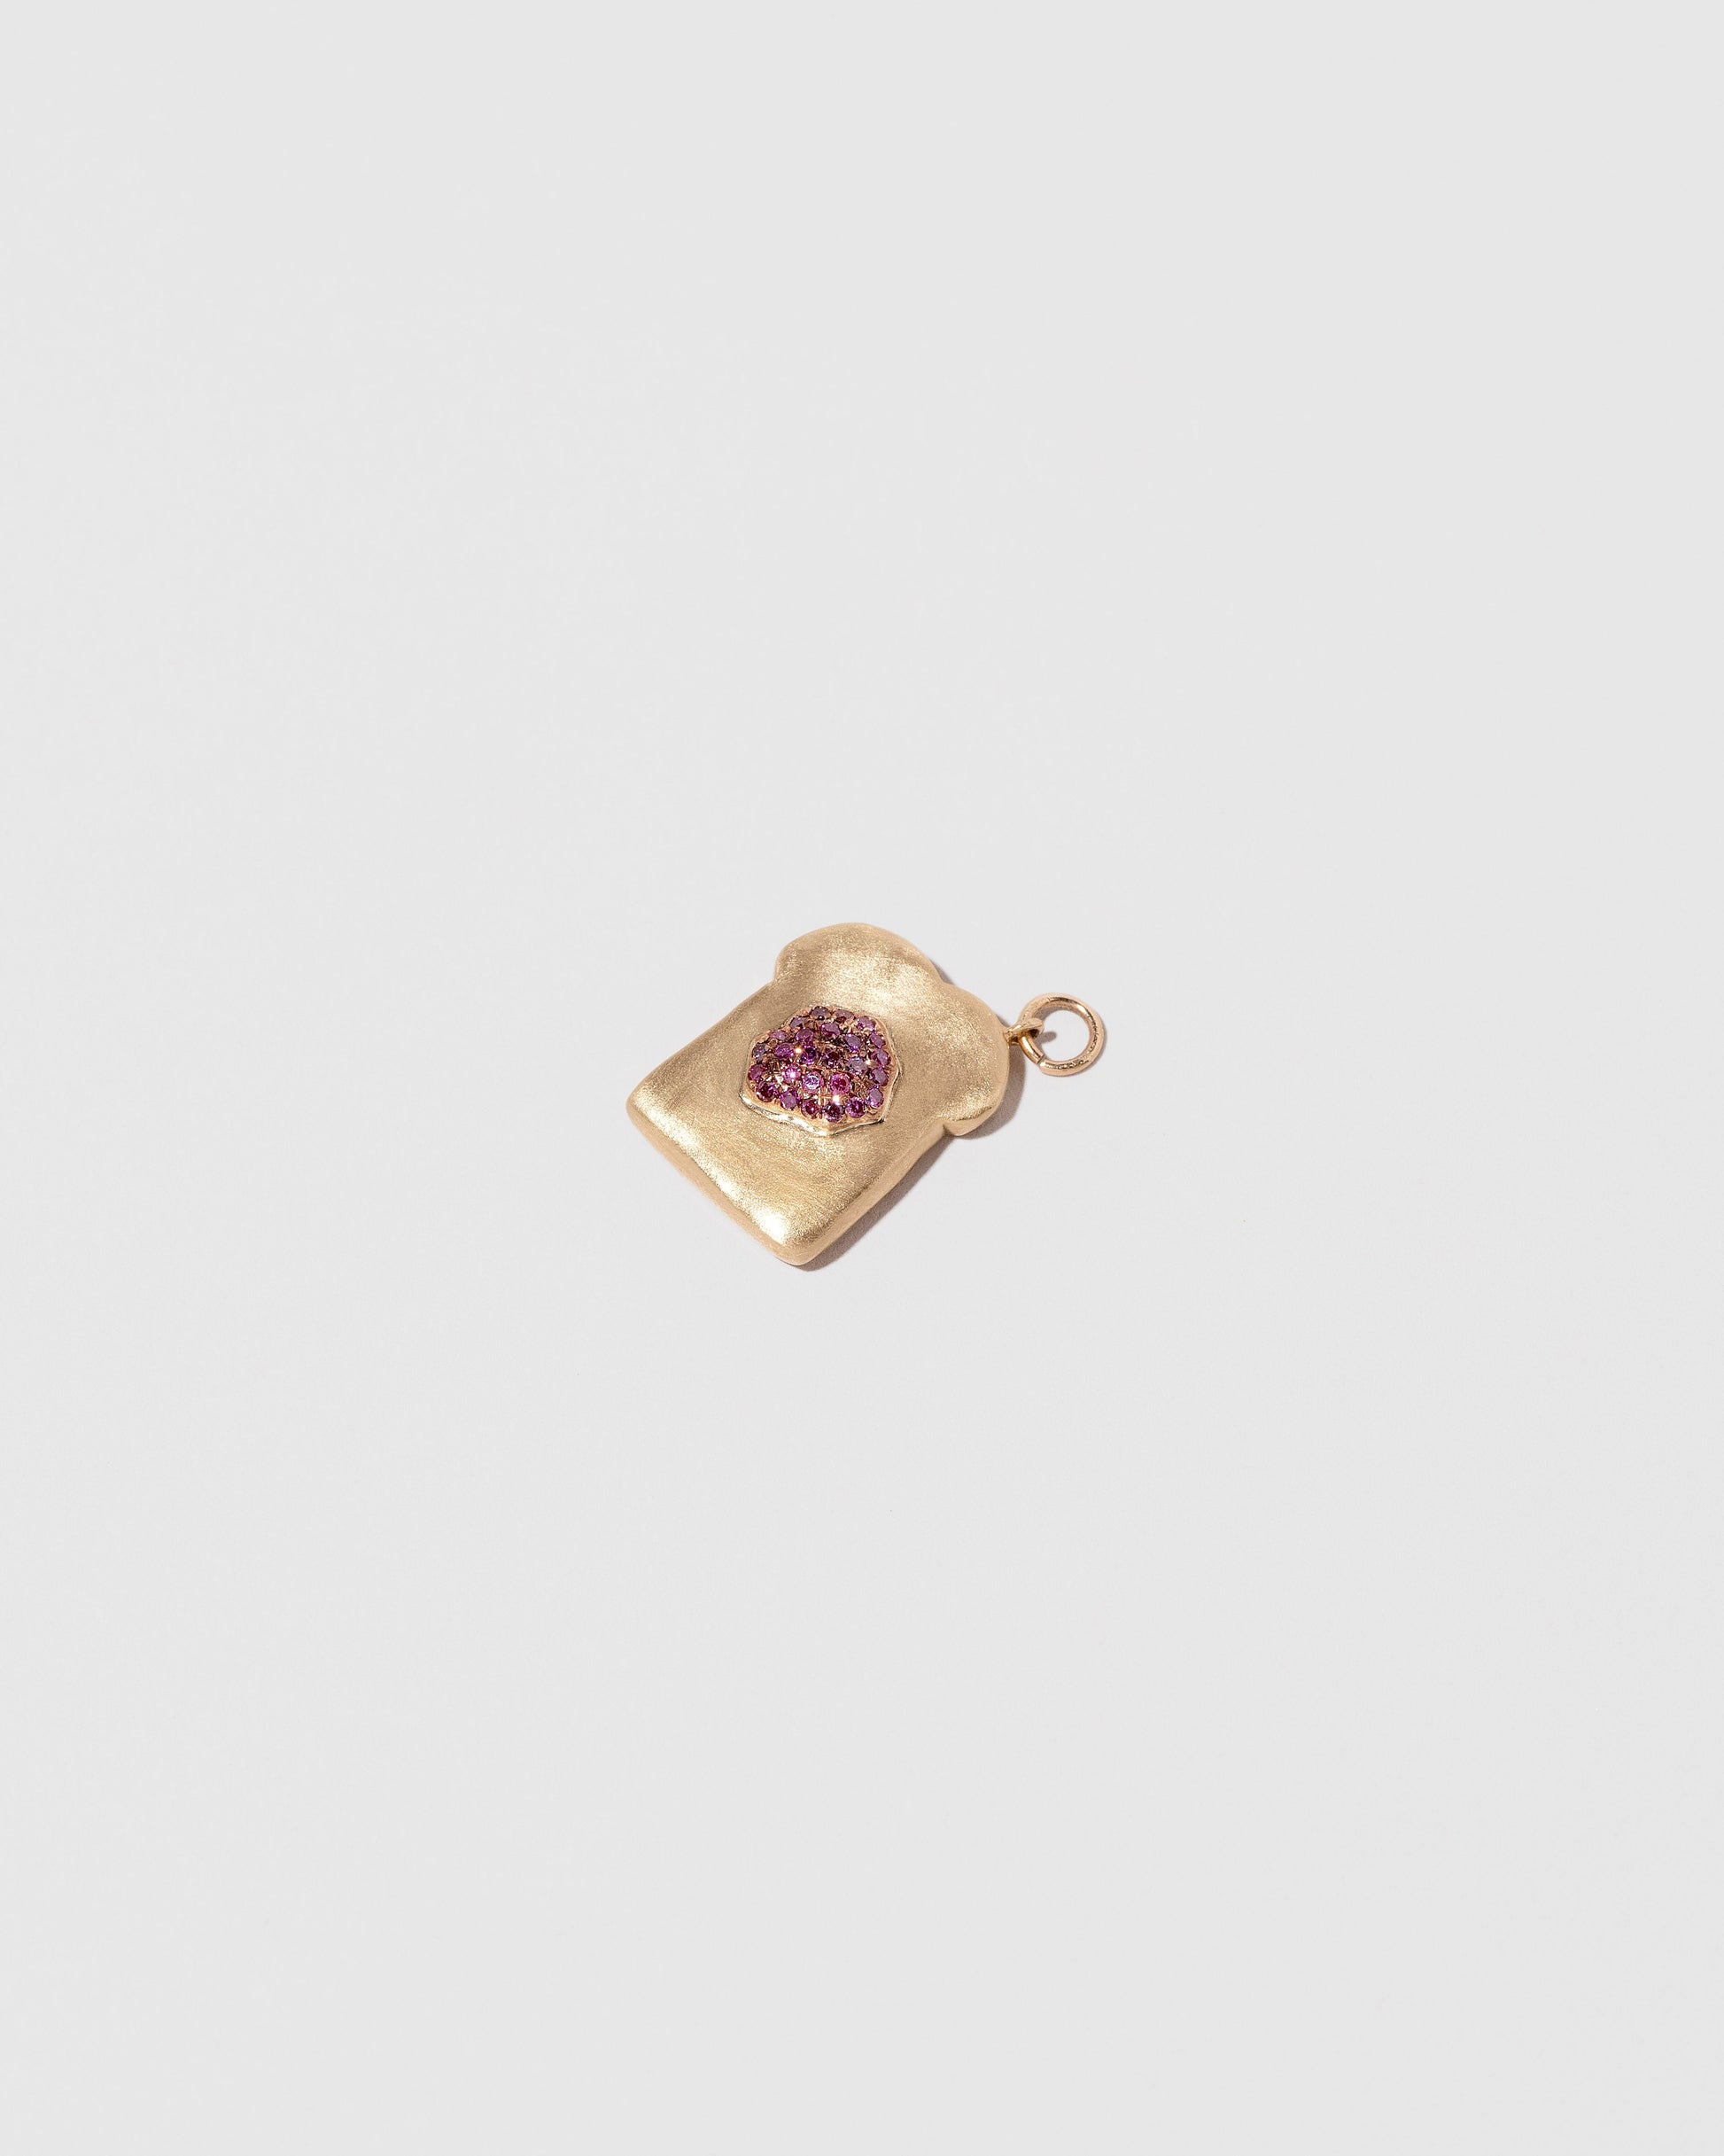  Toast Charm - with Jelly on light color background.